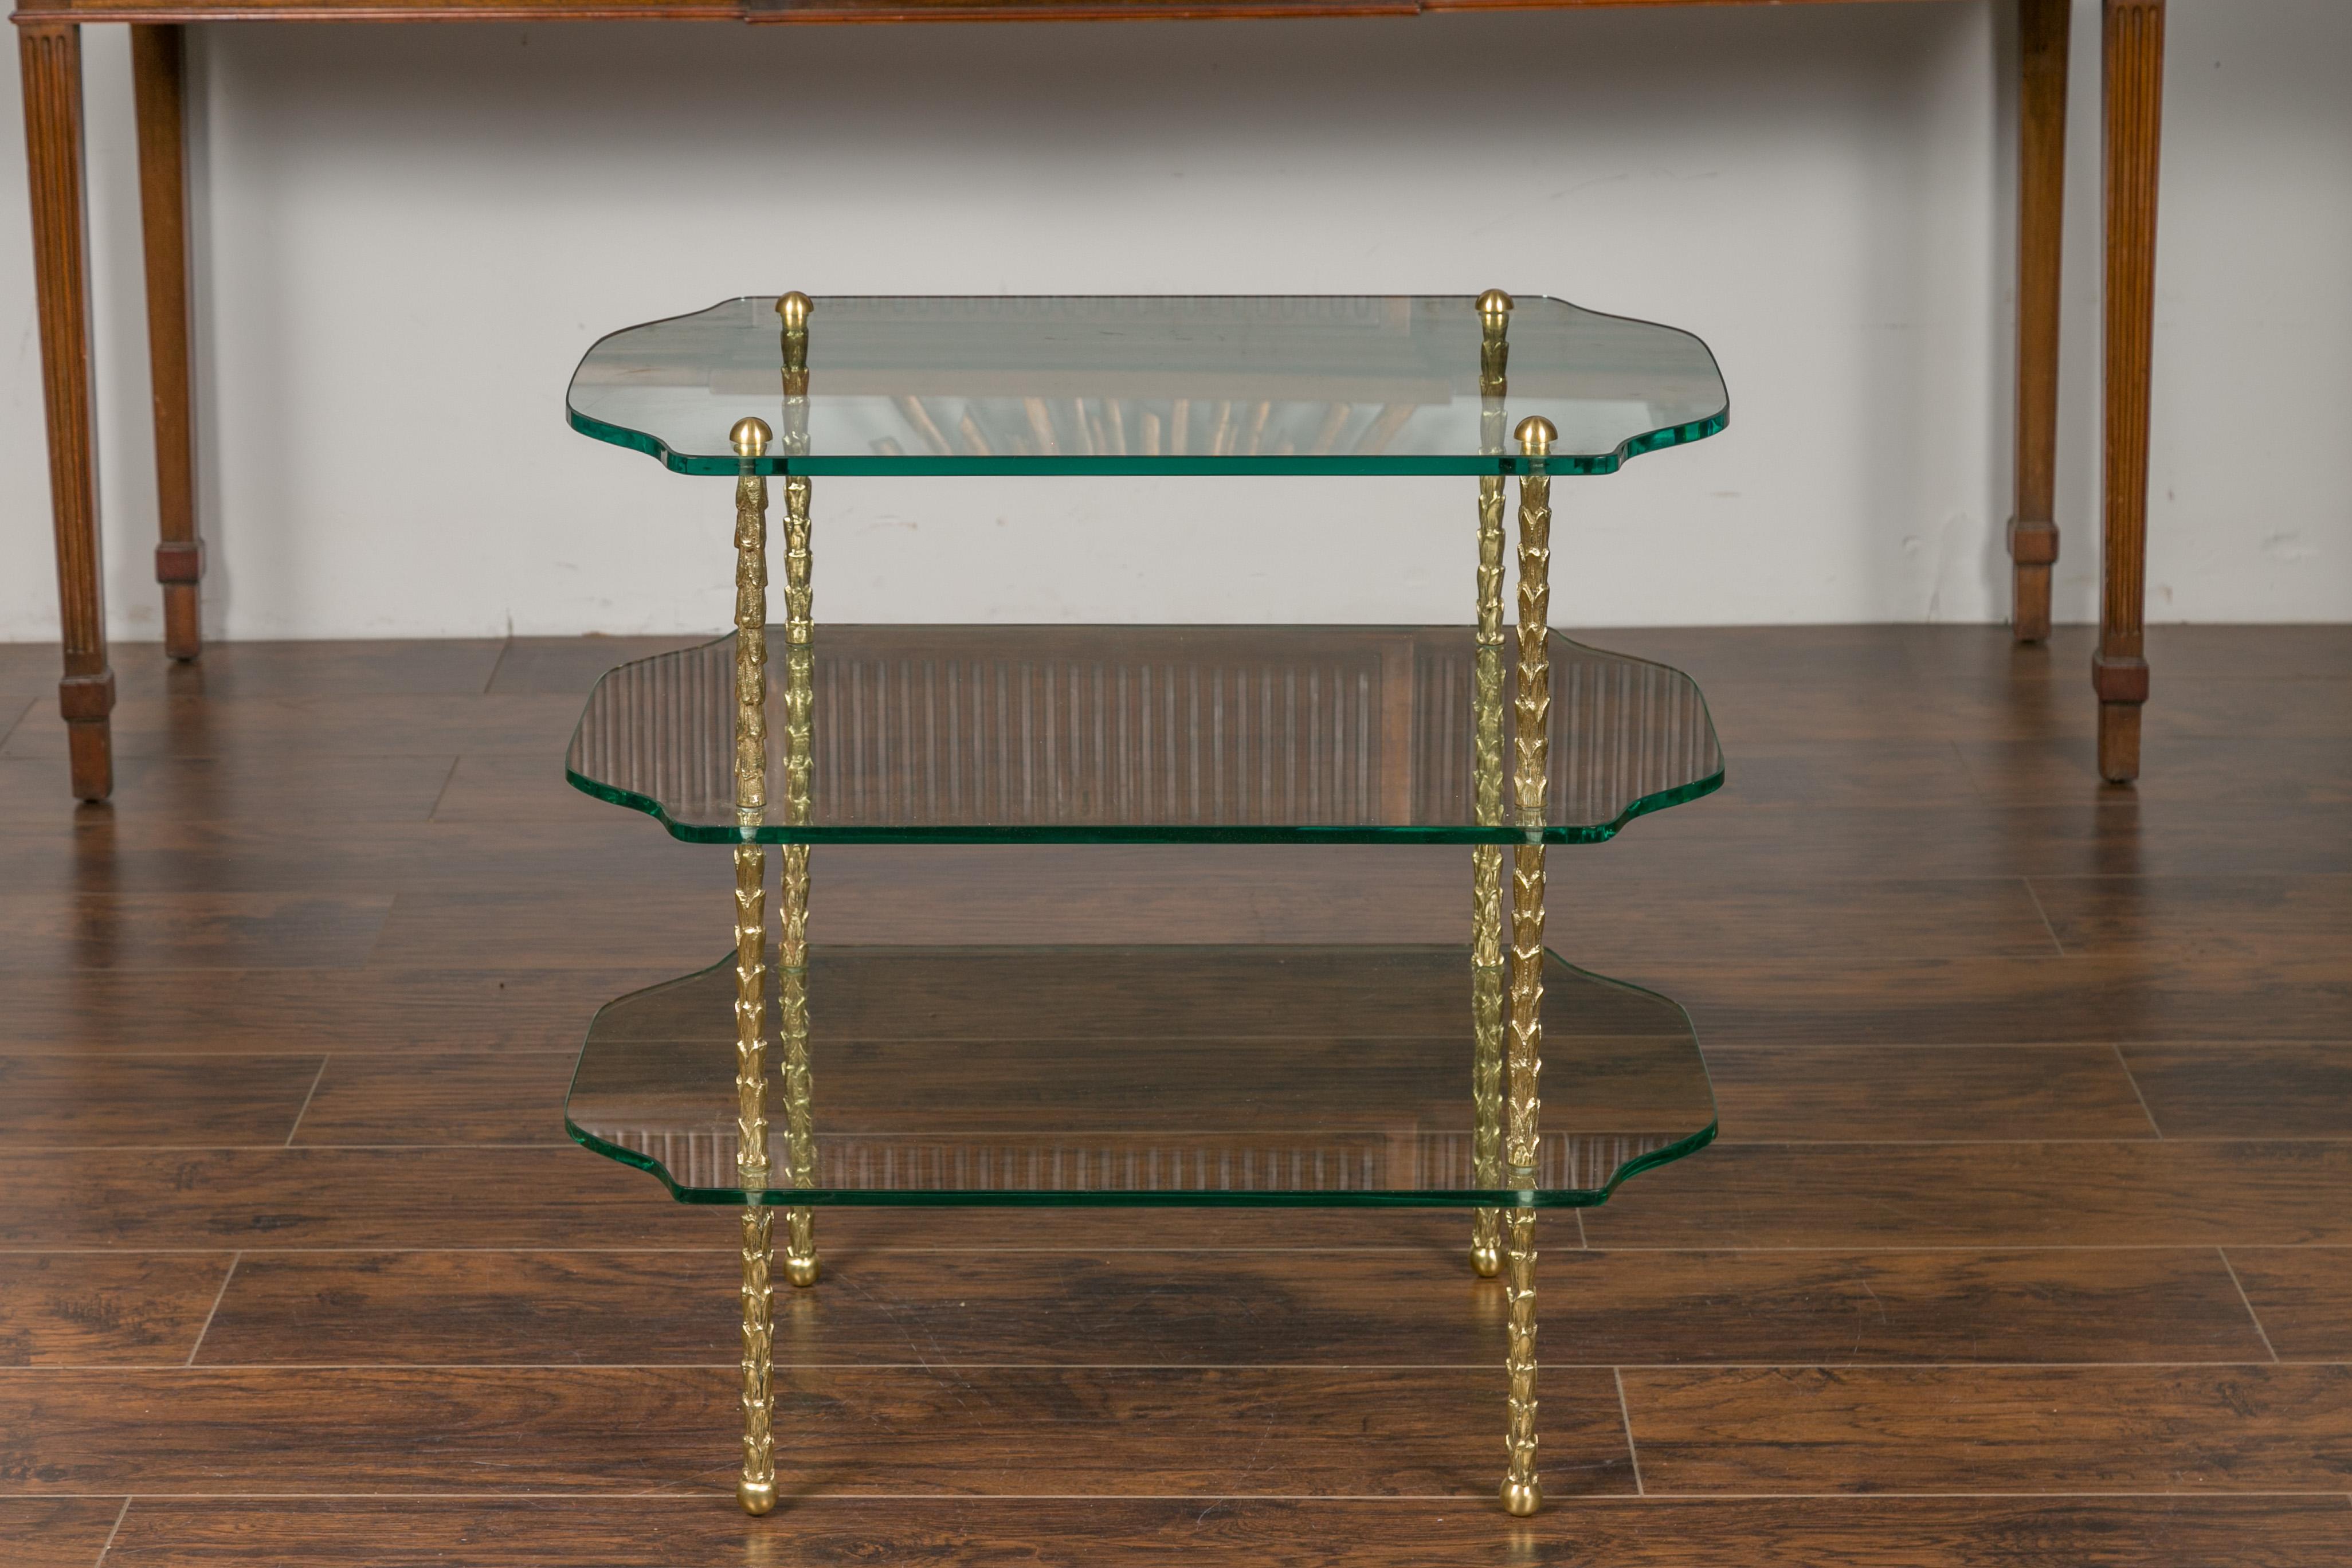 A vintage brass tiered table from the mid-20th century, with glass shelves and foliage motifs. Created during the midcentury period, this table features three shaped glass shelves secured by a brass structure adorned with stylized foliage motifs.